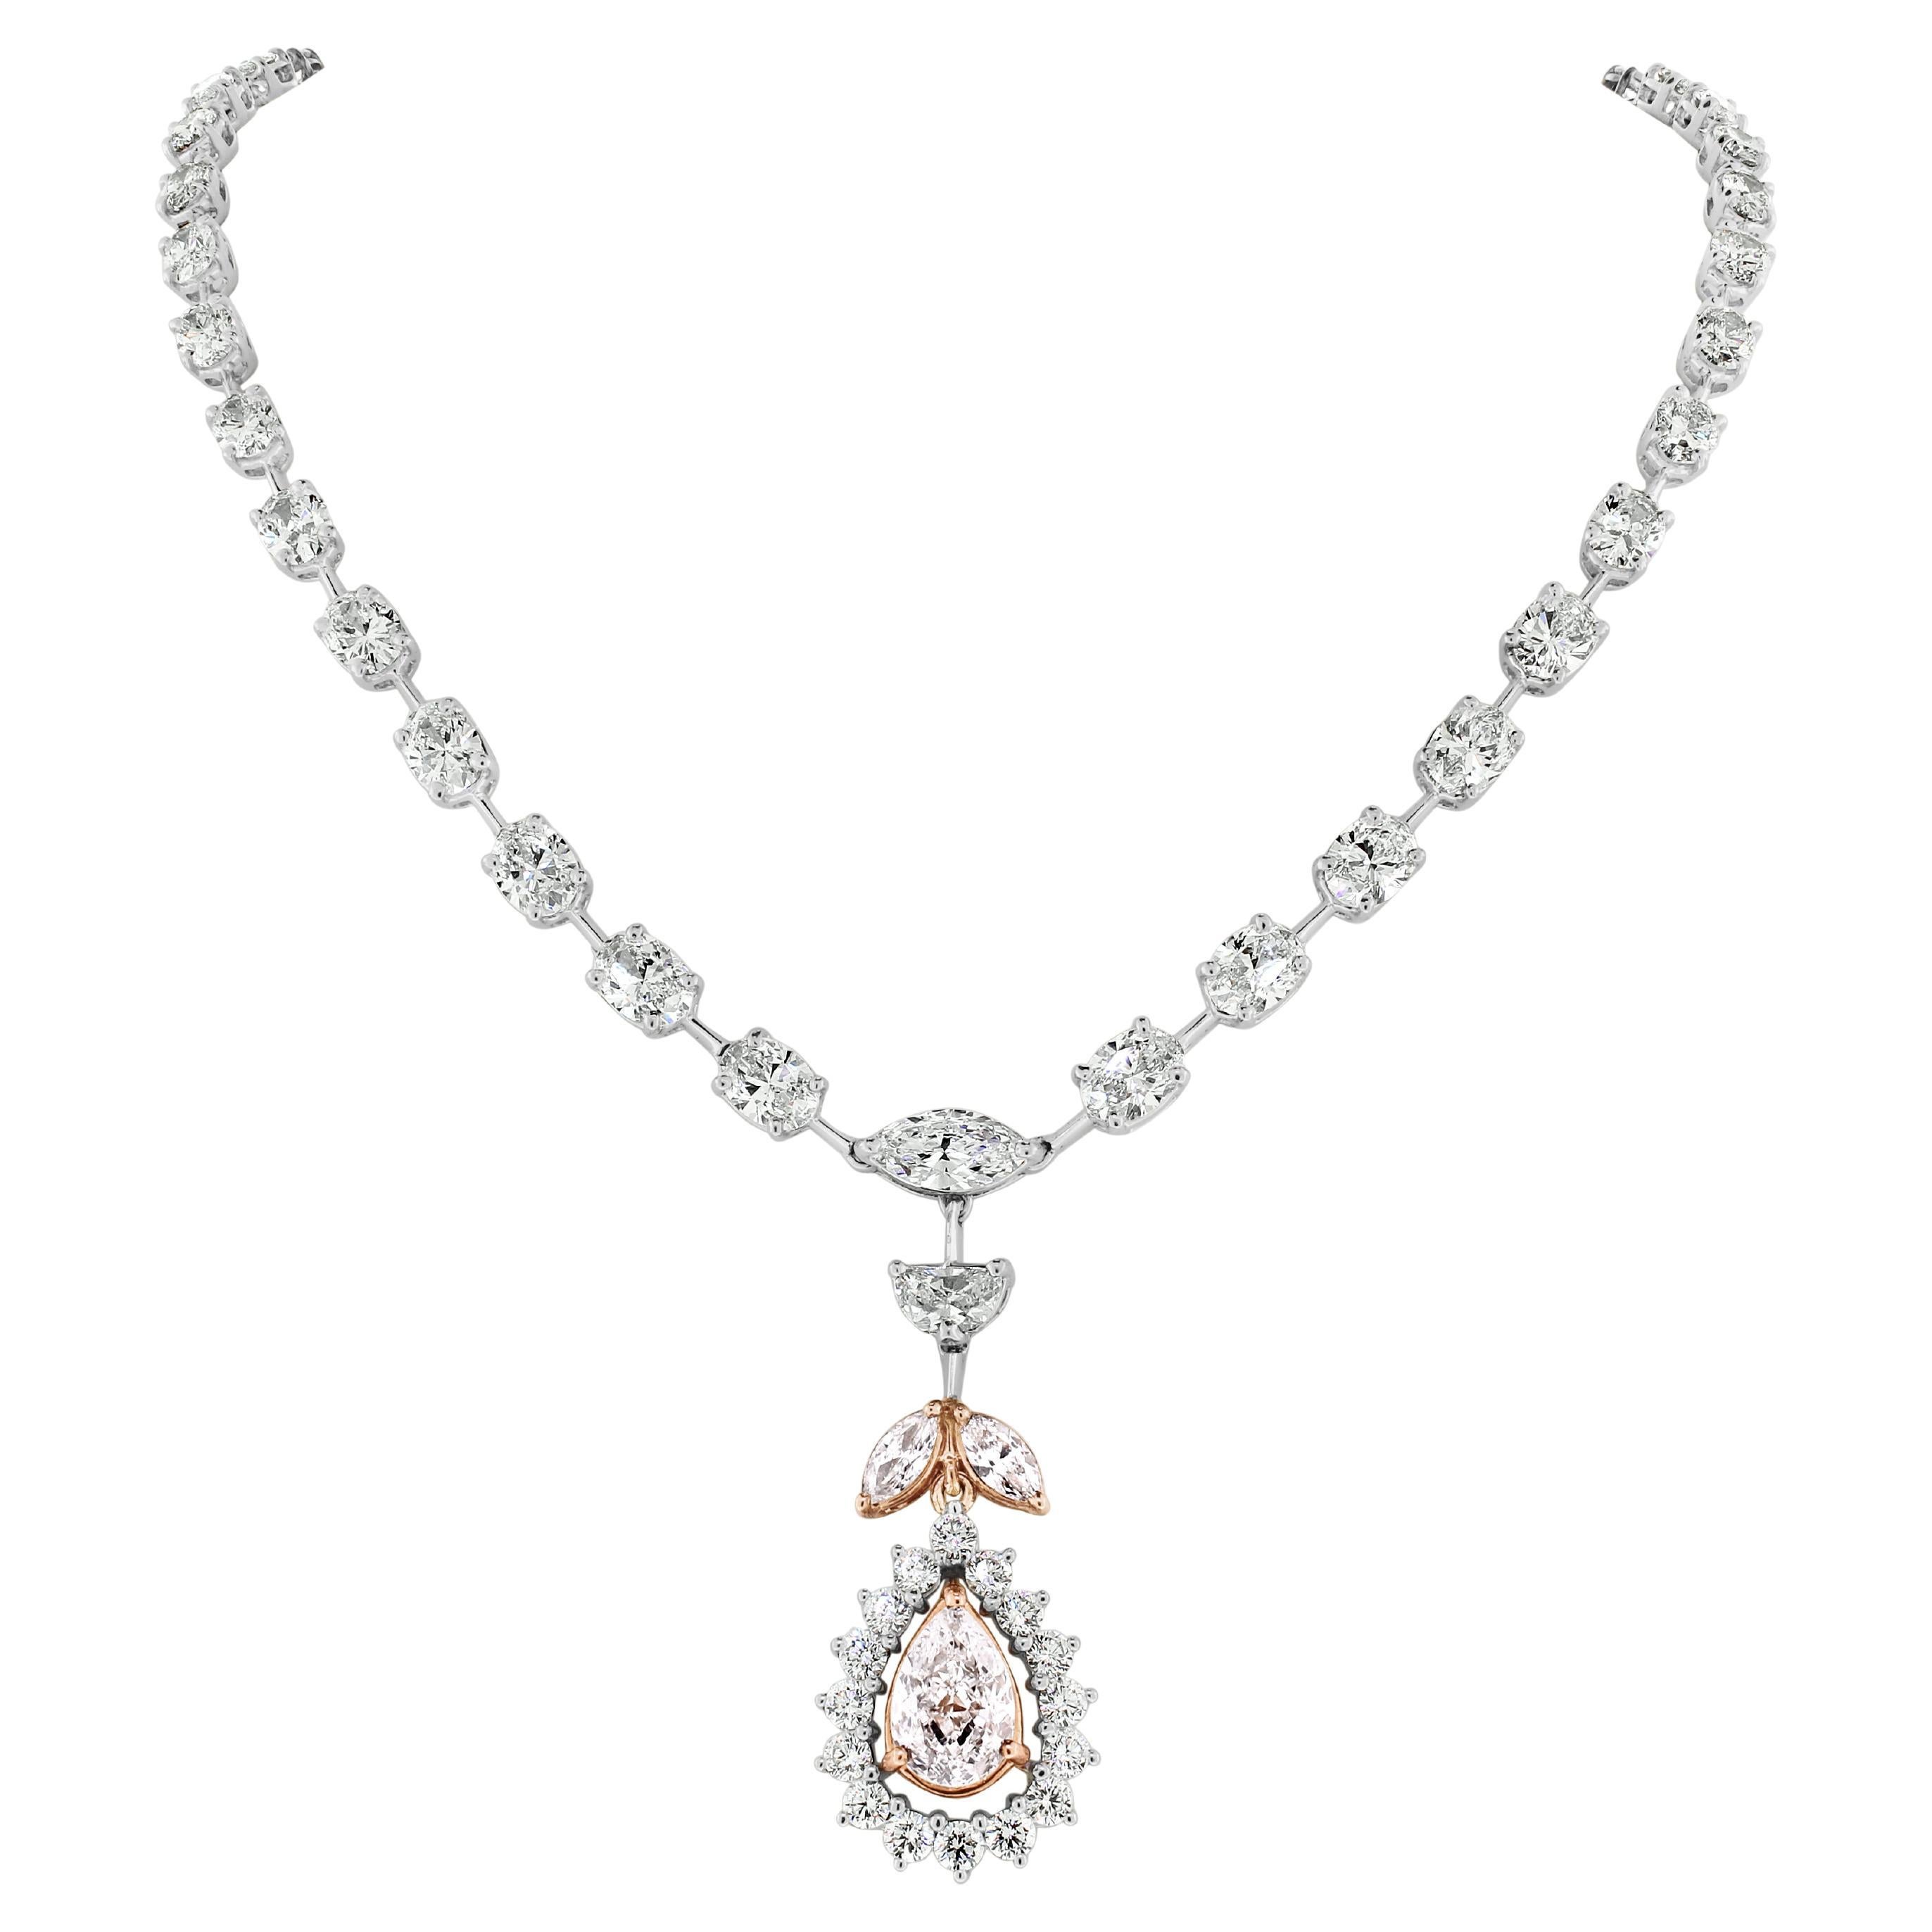 Beauvince Maira Diamond Necklace '19.26 ct Diamonds' in Gold For